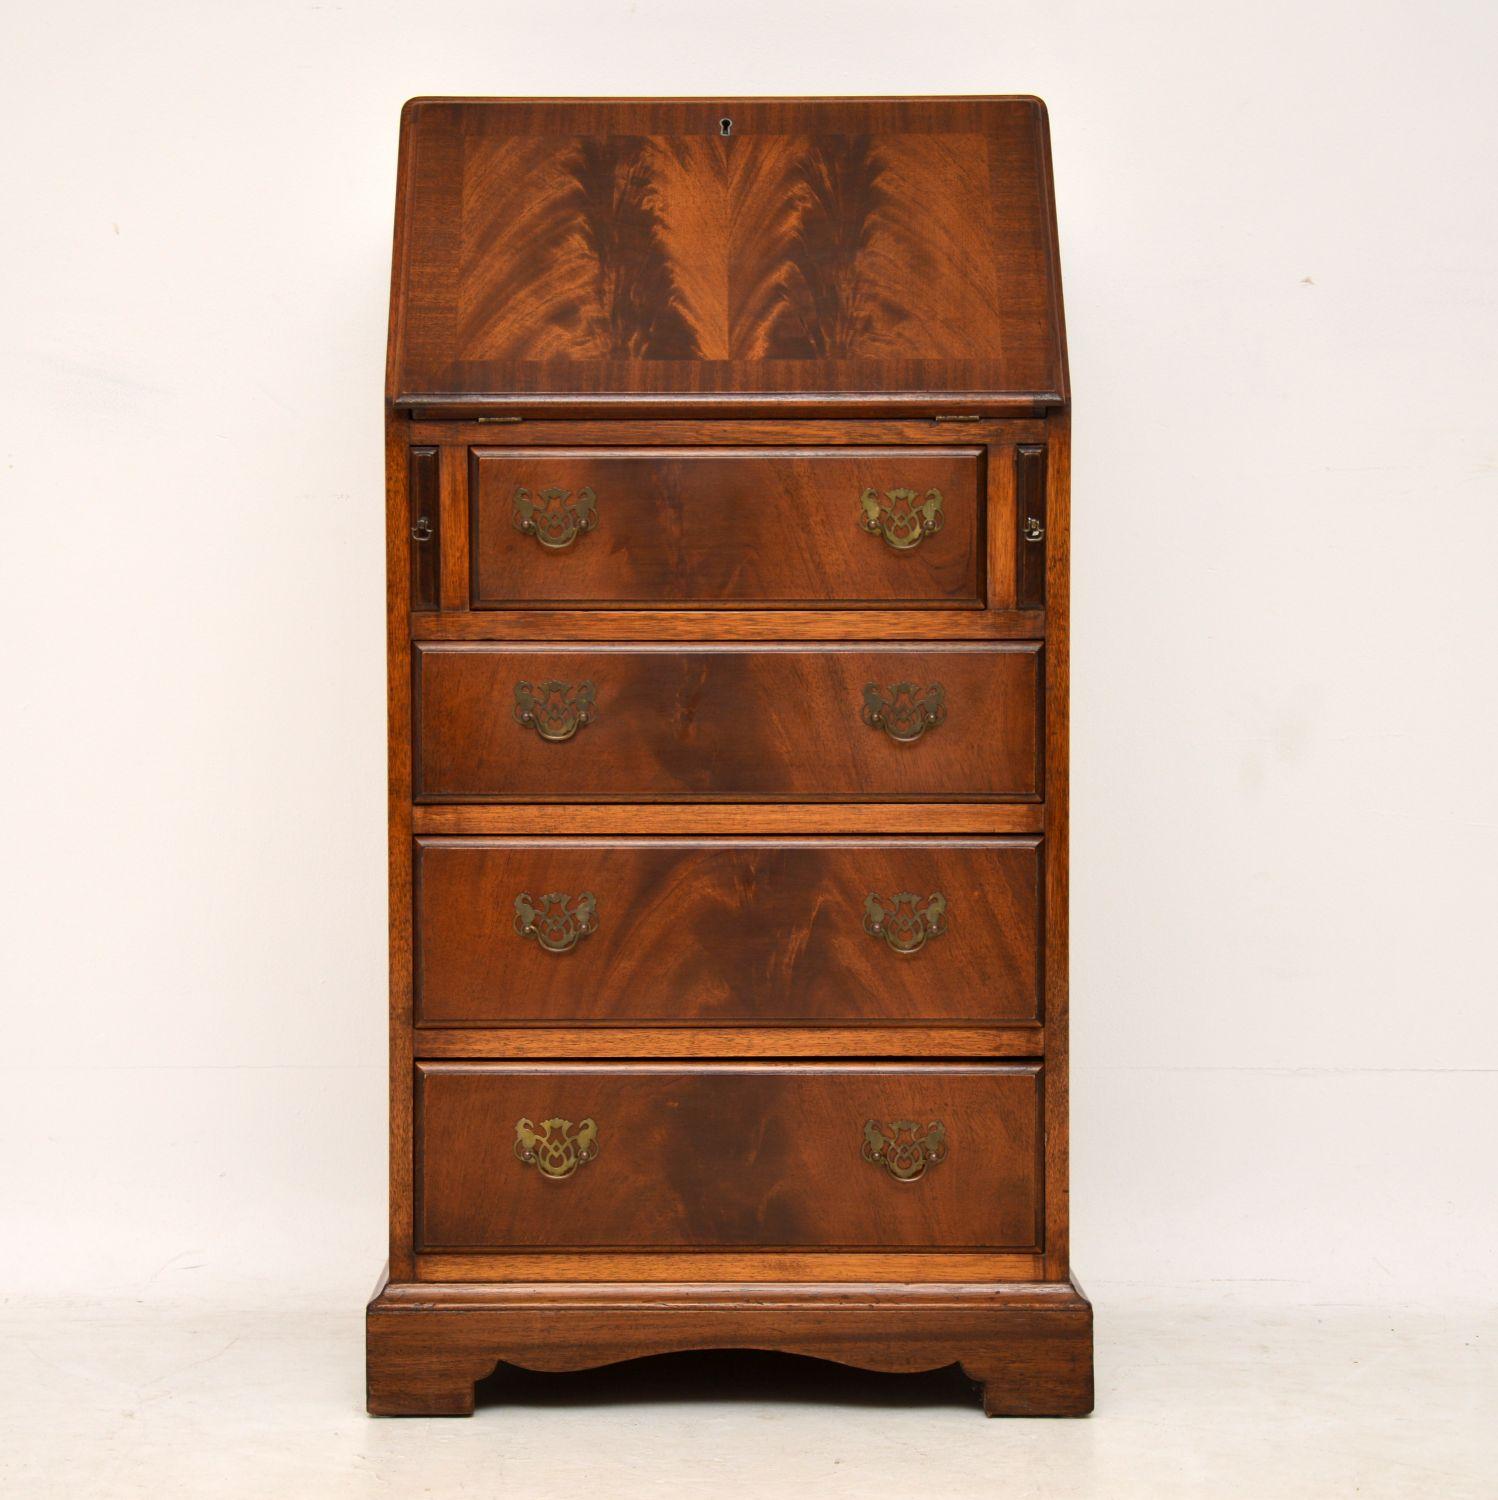 Slim proportioned antique flame mahogany bureau dating from the 1930s period and in excellent condition having just been French polished. It has a pull down flap revealing the original tooled leather writing surface with compartments and a small